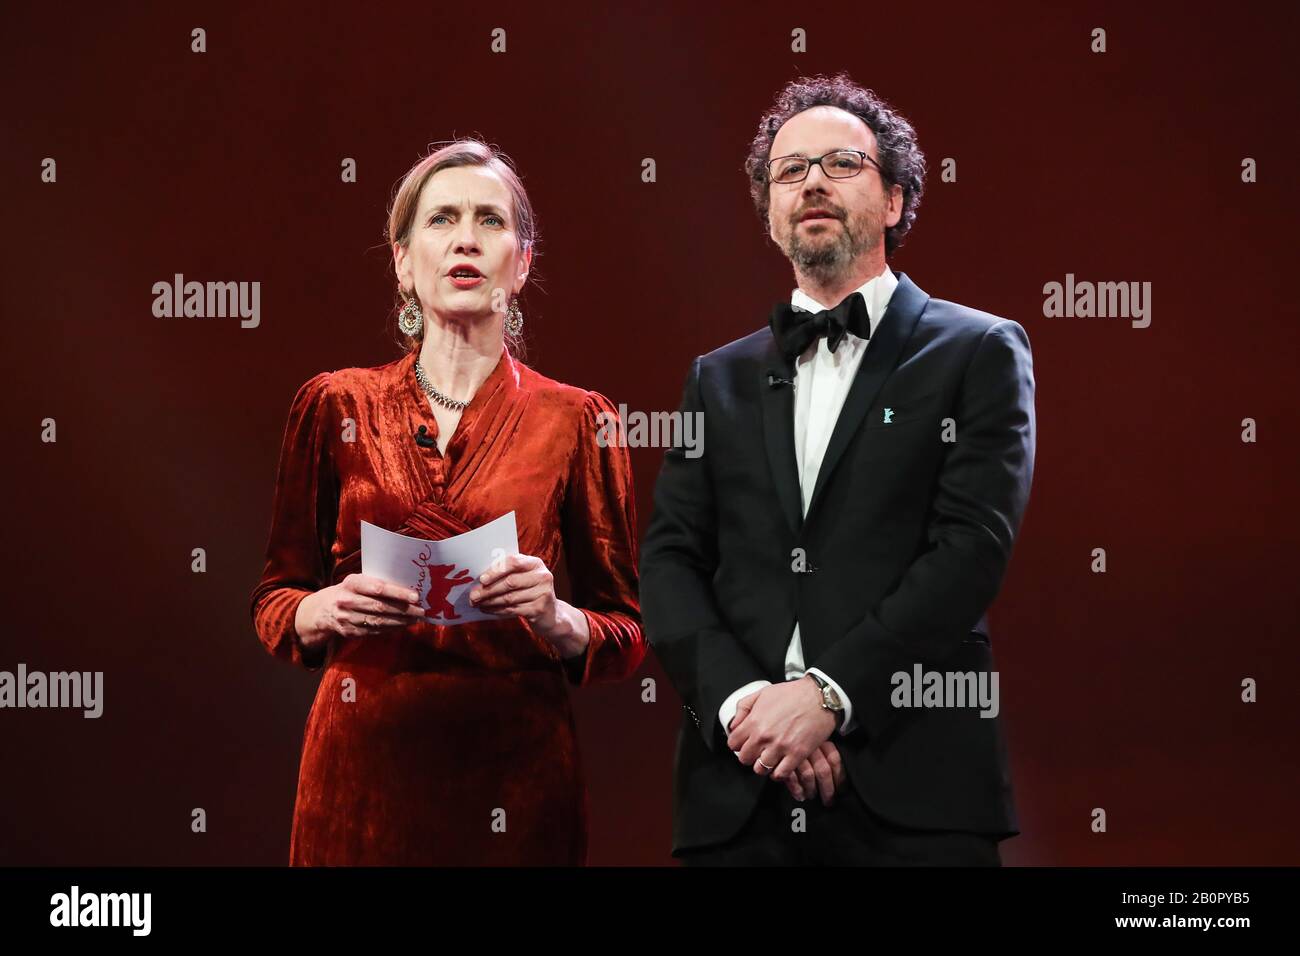 (200221) -- BERLIN, Feb. 21, 2020 (Xinhua) -- Berlinale Executive Director Mariette Rissenbeek (L) and Berlinale Artistic Director Carlo Chatrian attend the opening ceremony of the 70th Berlin International Film Festival in Berlin, capital of Germany, Feb. 20, 2020. The 70th Berlin International Film Festival, or as it's more commonly known, the Berlinale, kicked off on Thursday with a literary drama 'My Salinger Year'.A total of 18 films have made it into this year's competition category and they will compete for the Golden Bear for best film, and other individual awards, the Silver Bears. (X Stock Photo